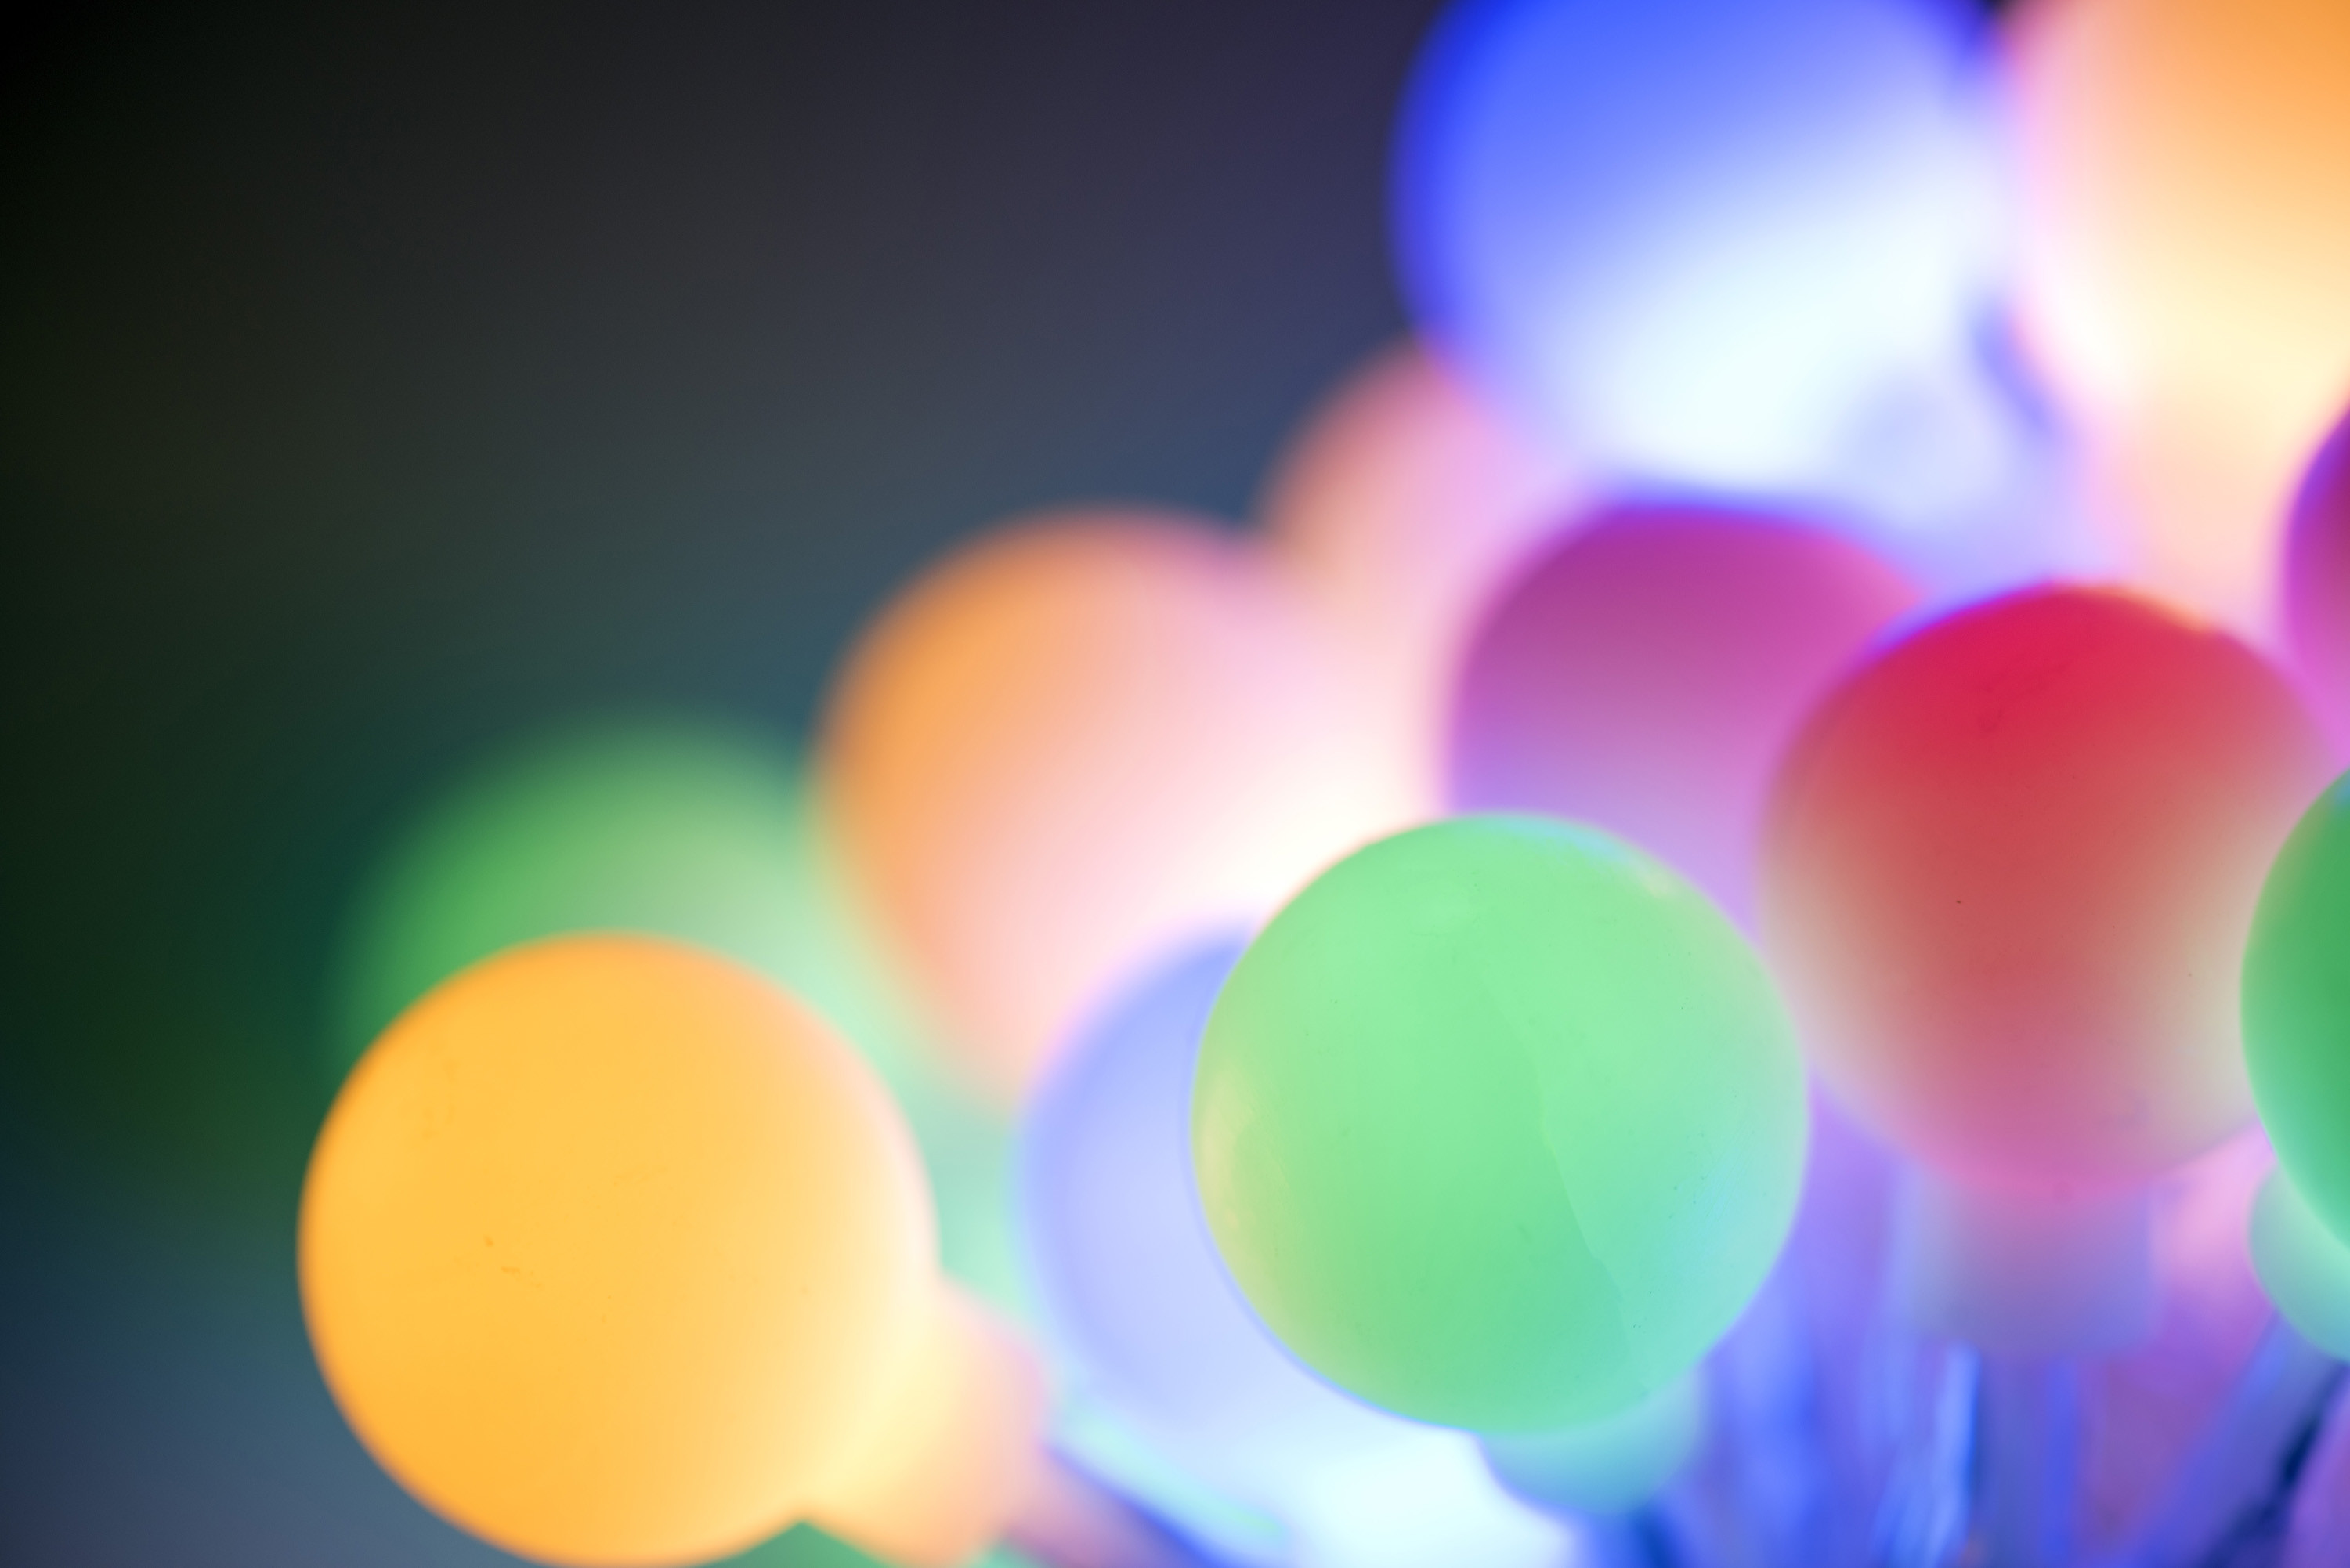 3000x2002 Full Size of Christmas: Christmas Lights Background Images For Desktop  Photo Of Coloured: ...